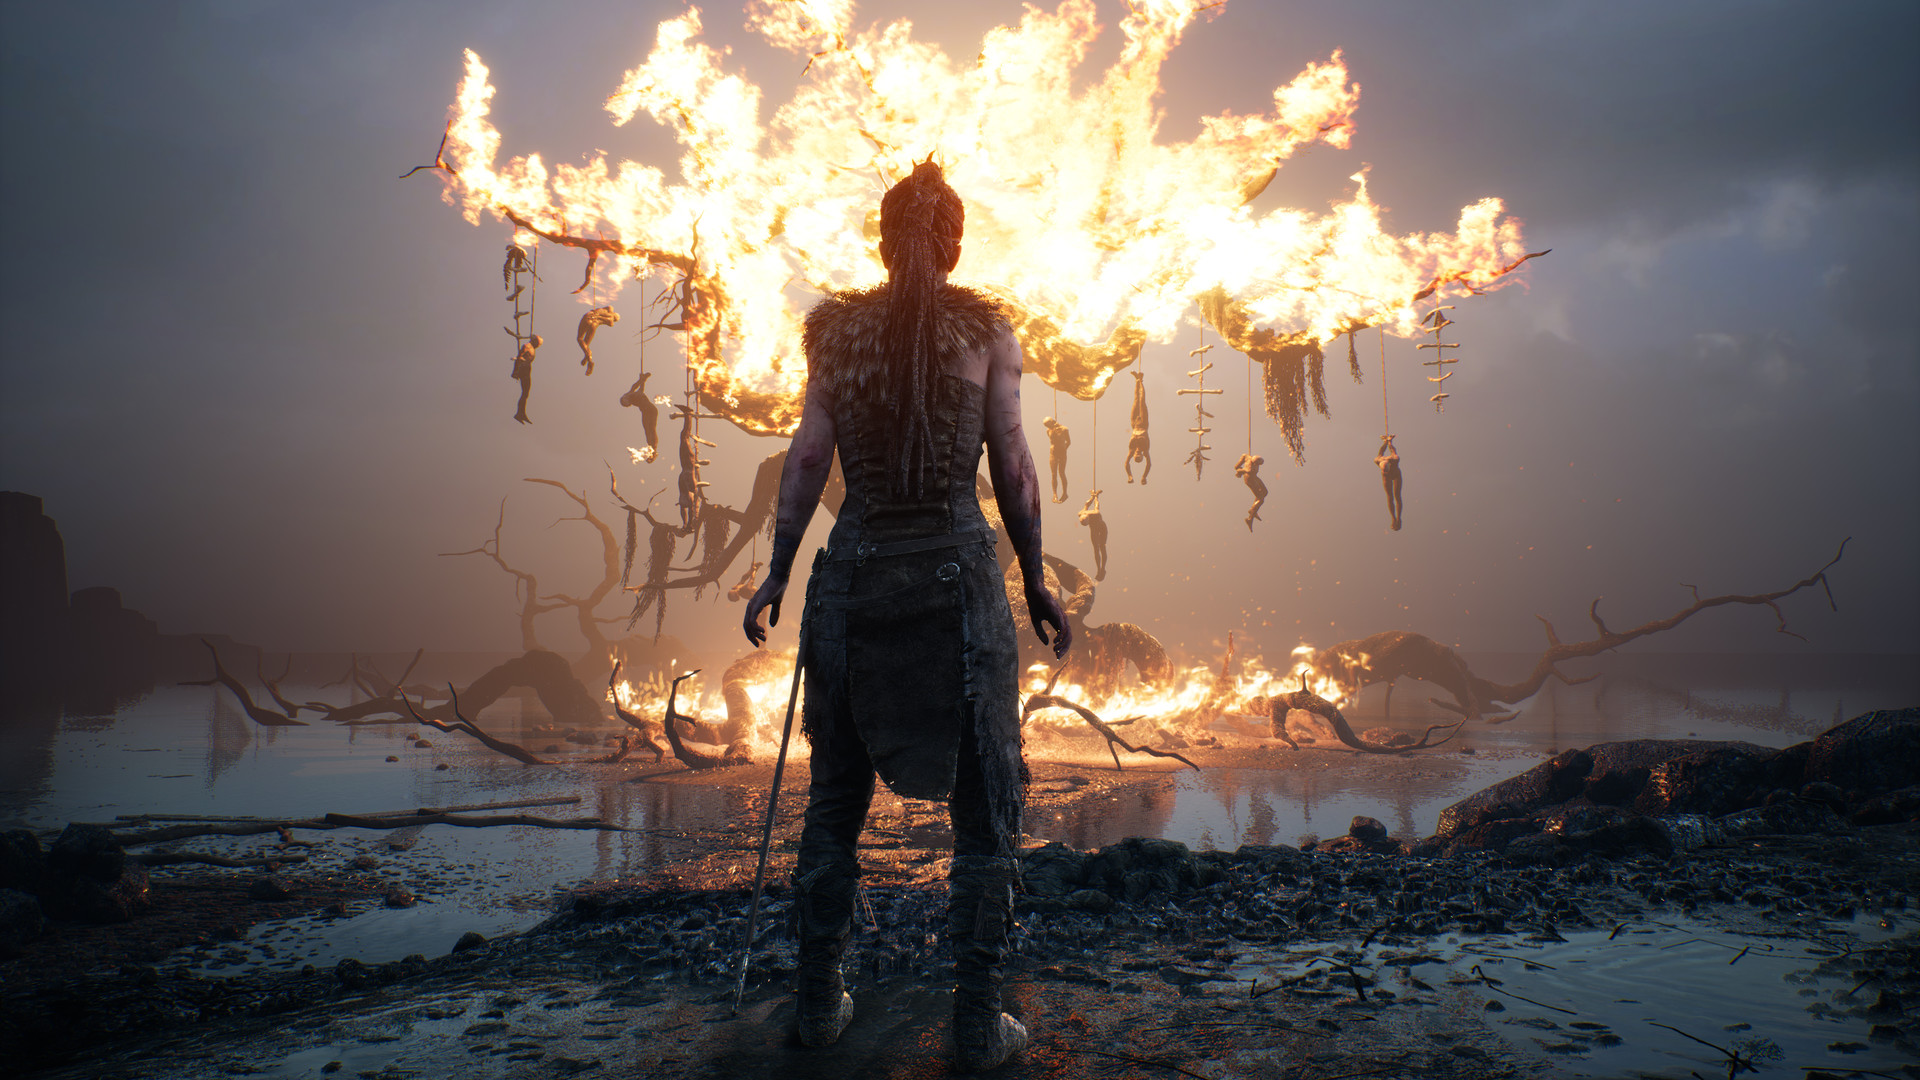 PC gamers can grab Hellblade: Senua’s Sacrifice at a bargain price ahead of its sequel’s launch